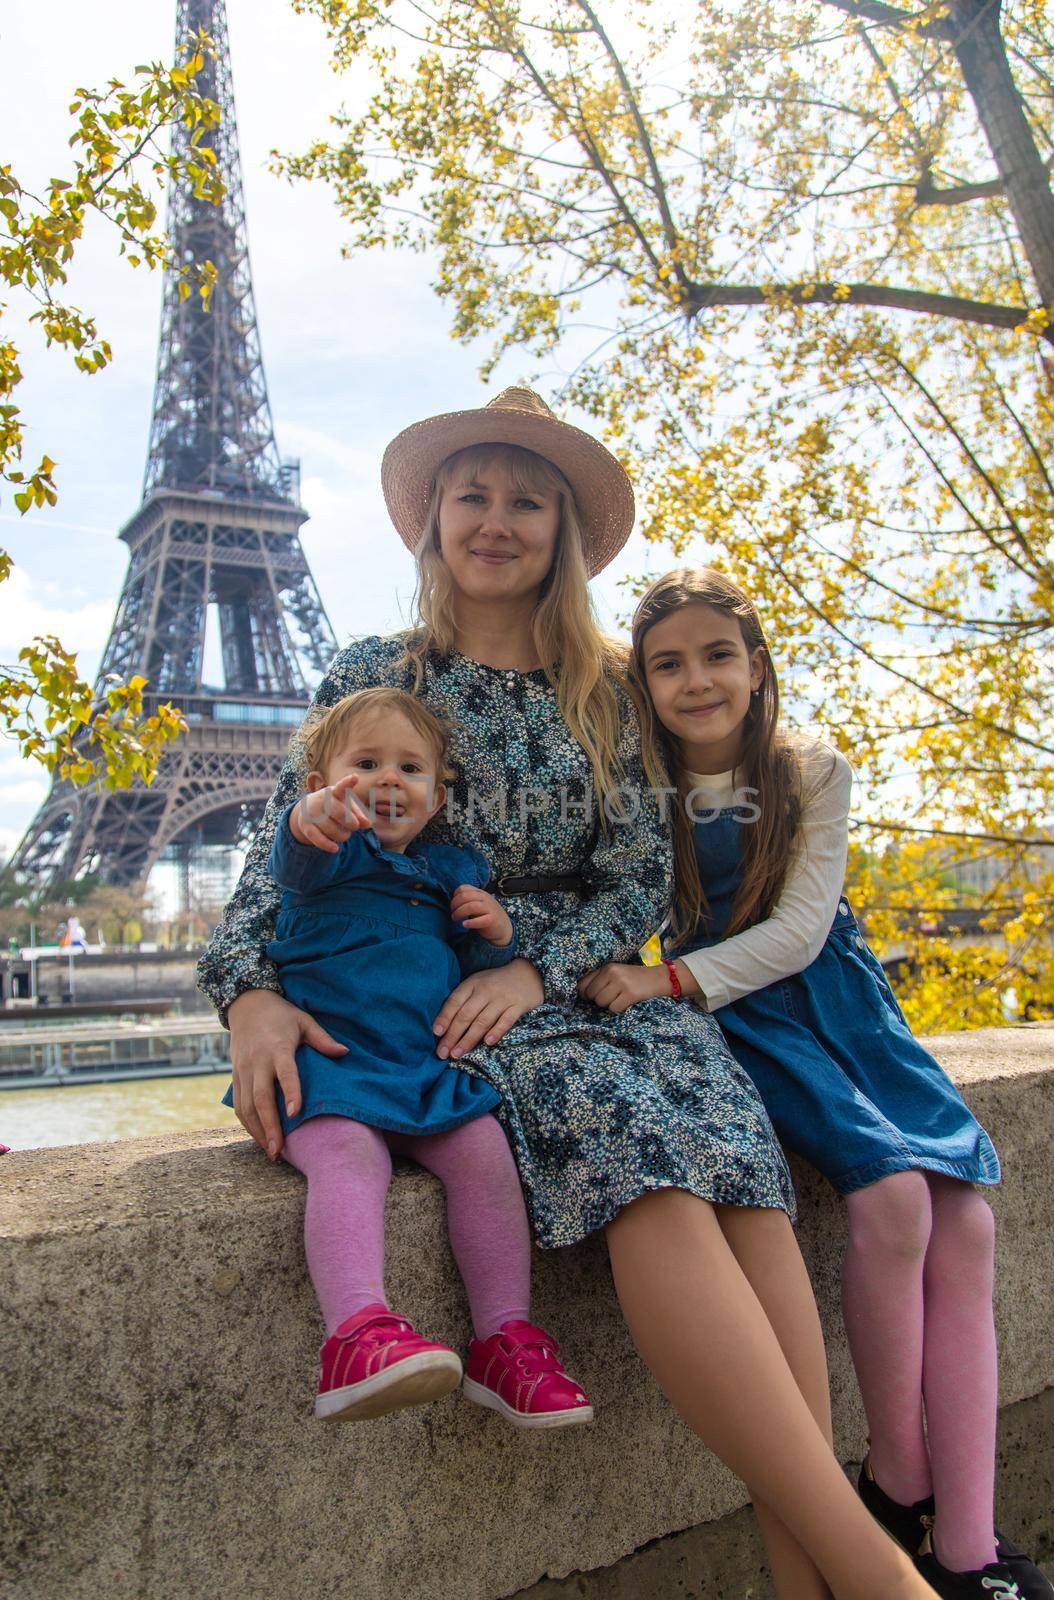 Woman with children near the eiffel tower. Selective focus. by yanadjana